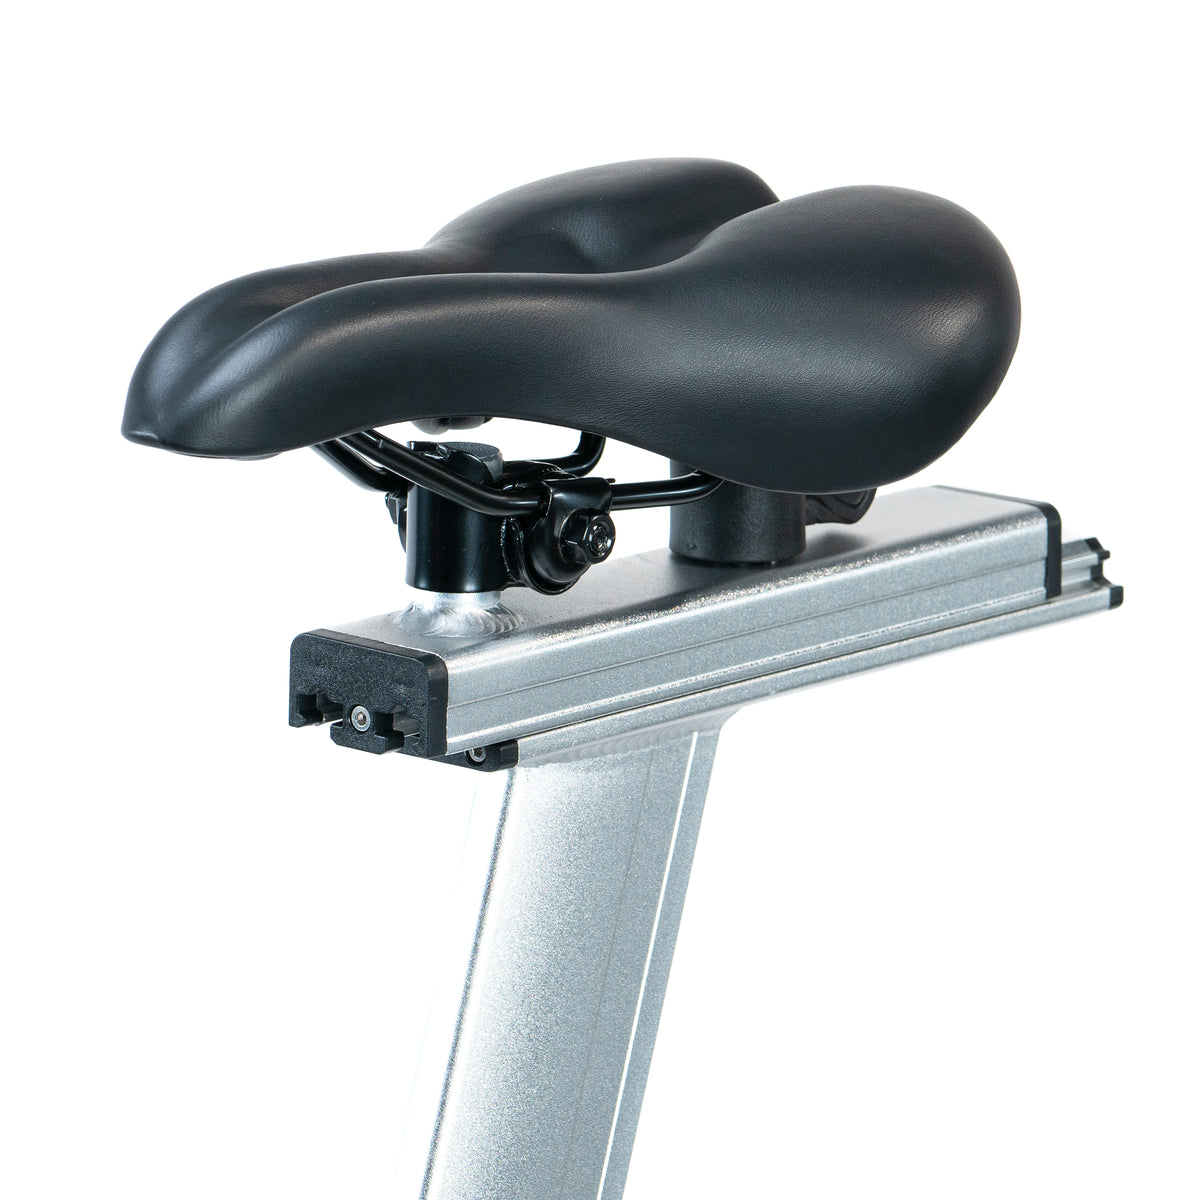 FitWay Equip. 1500IC Indoor Cycle seat view